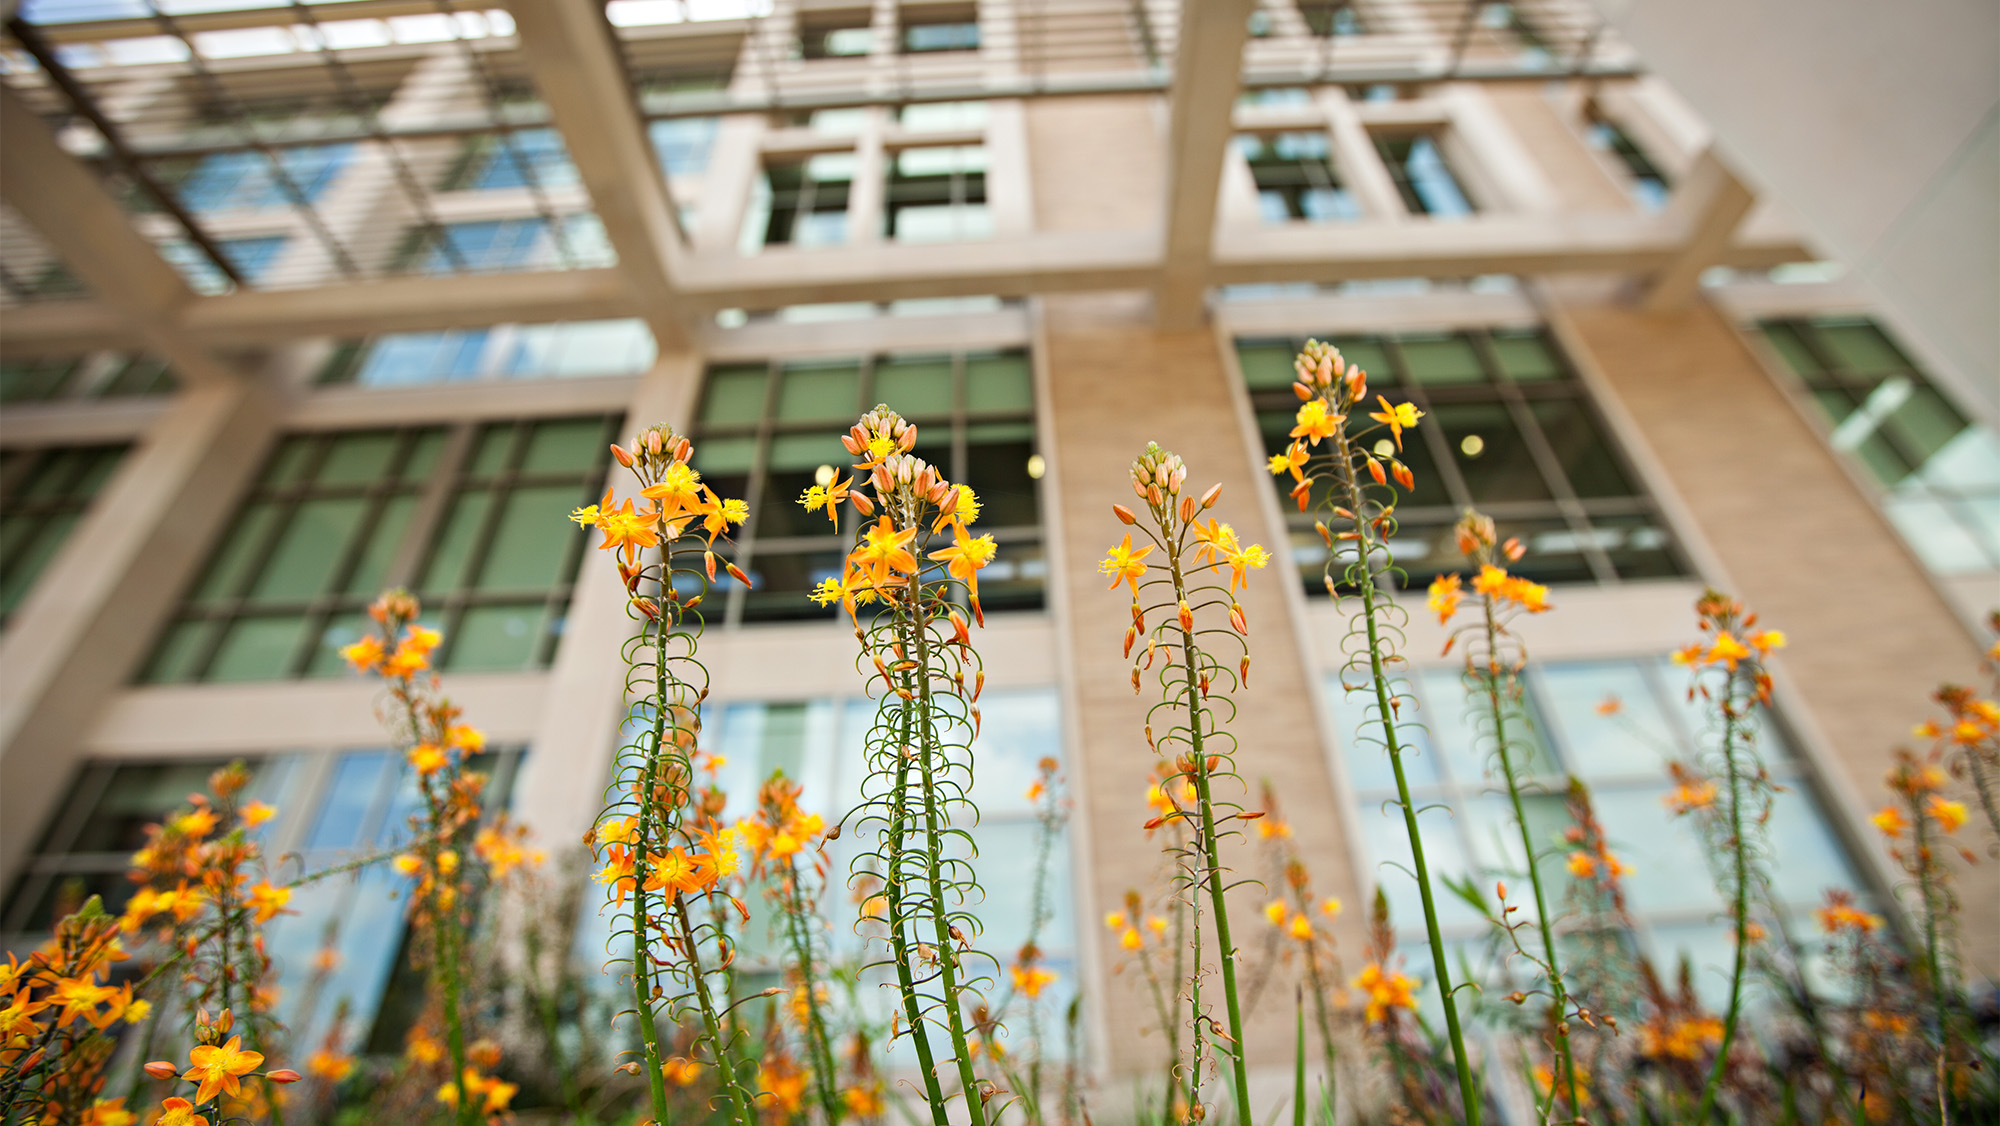 Flowers at the Emerging Technologies Building